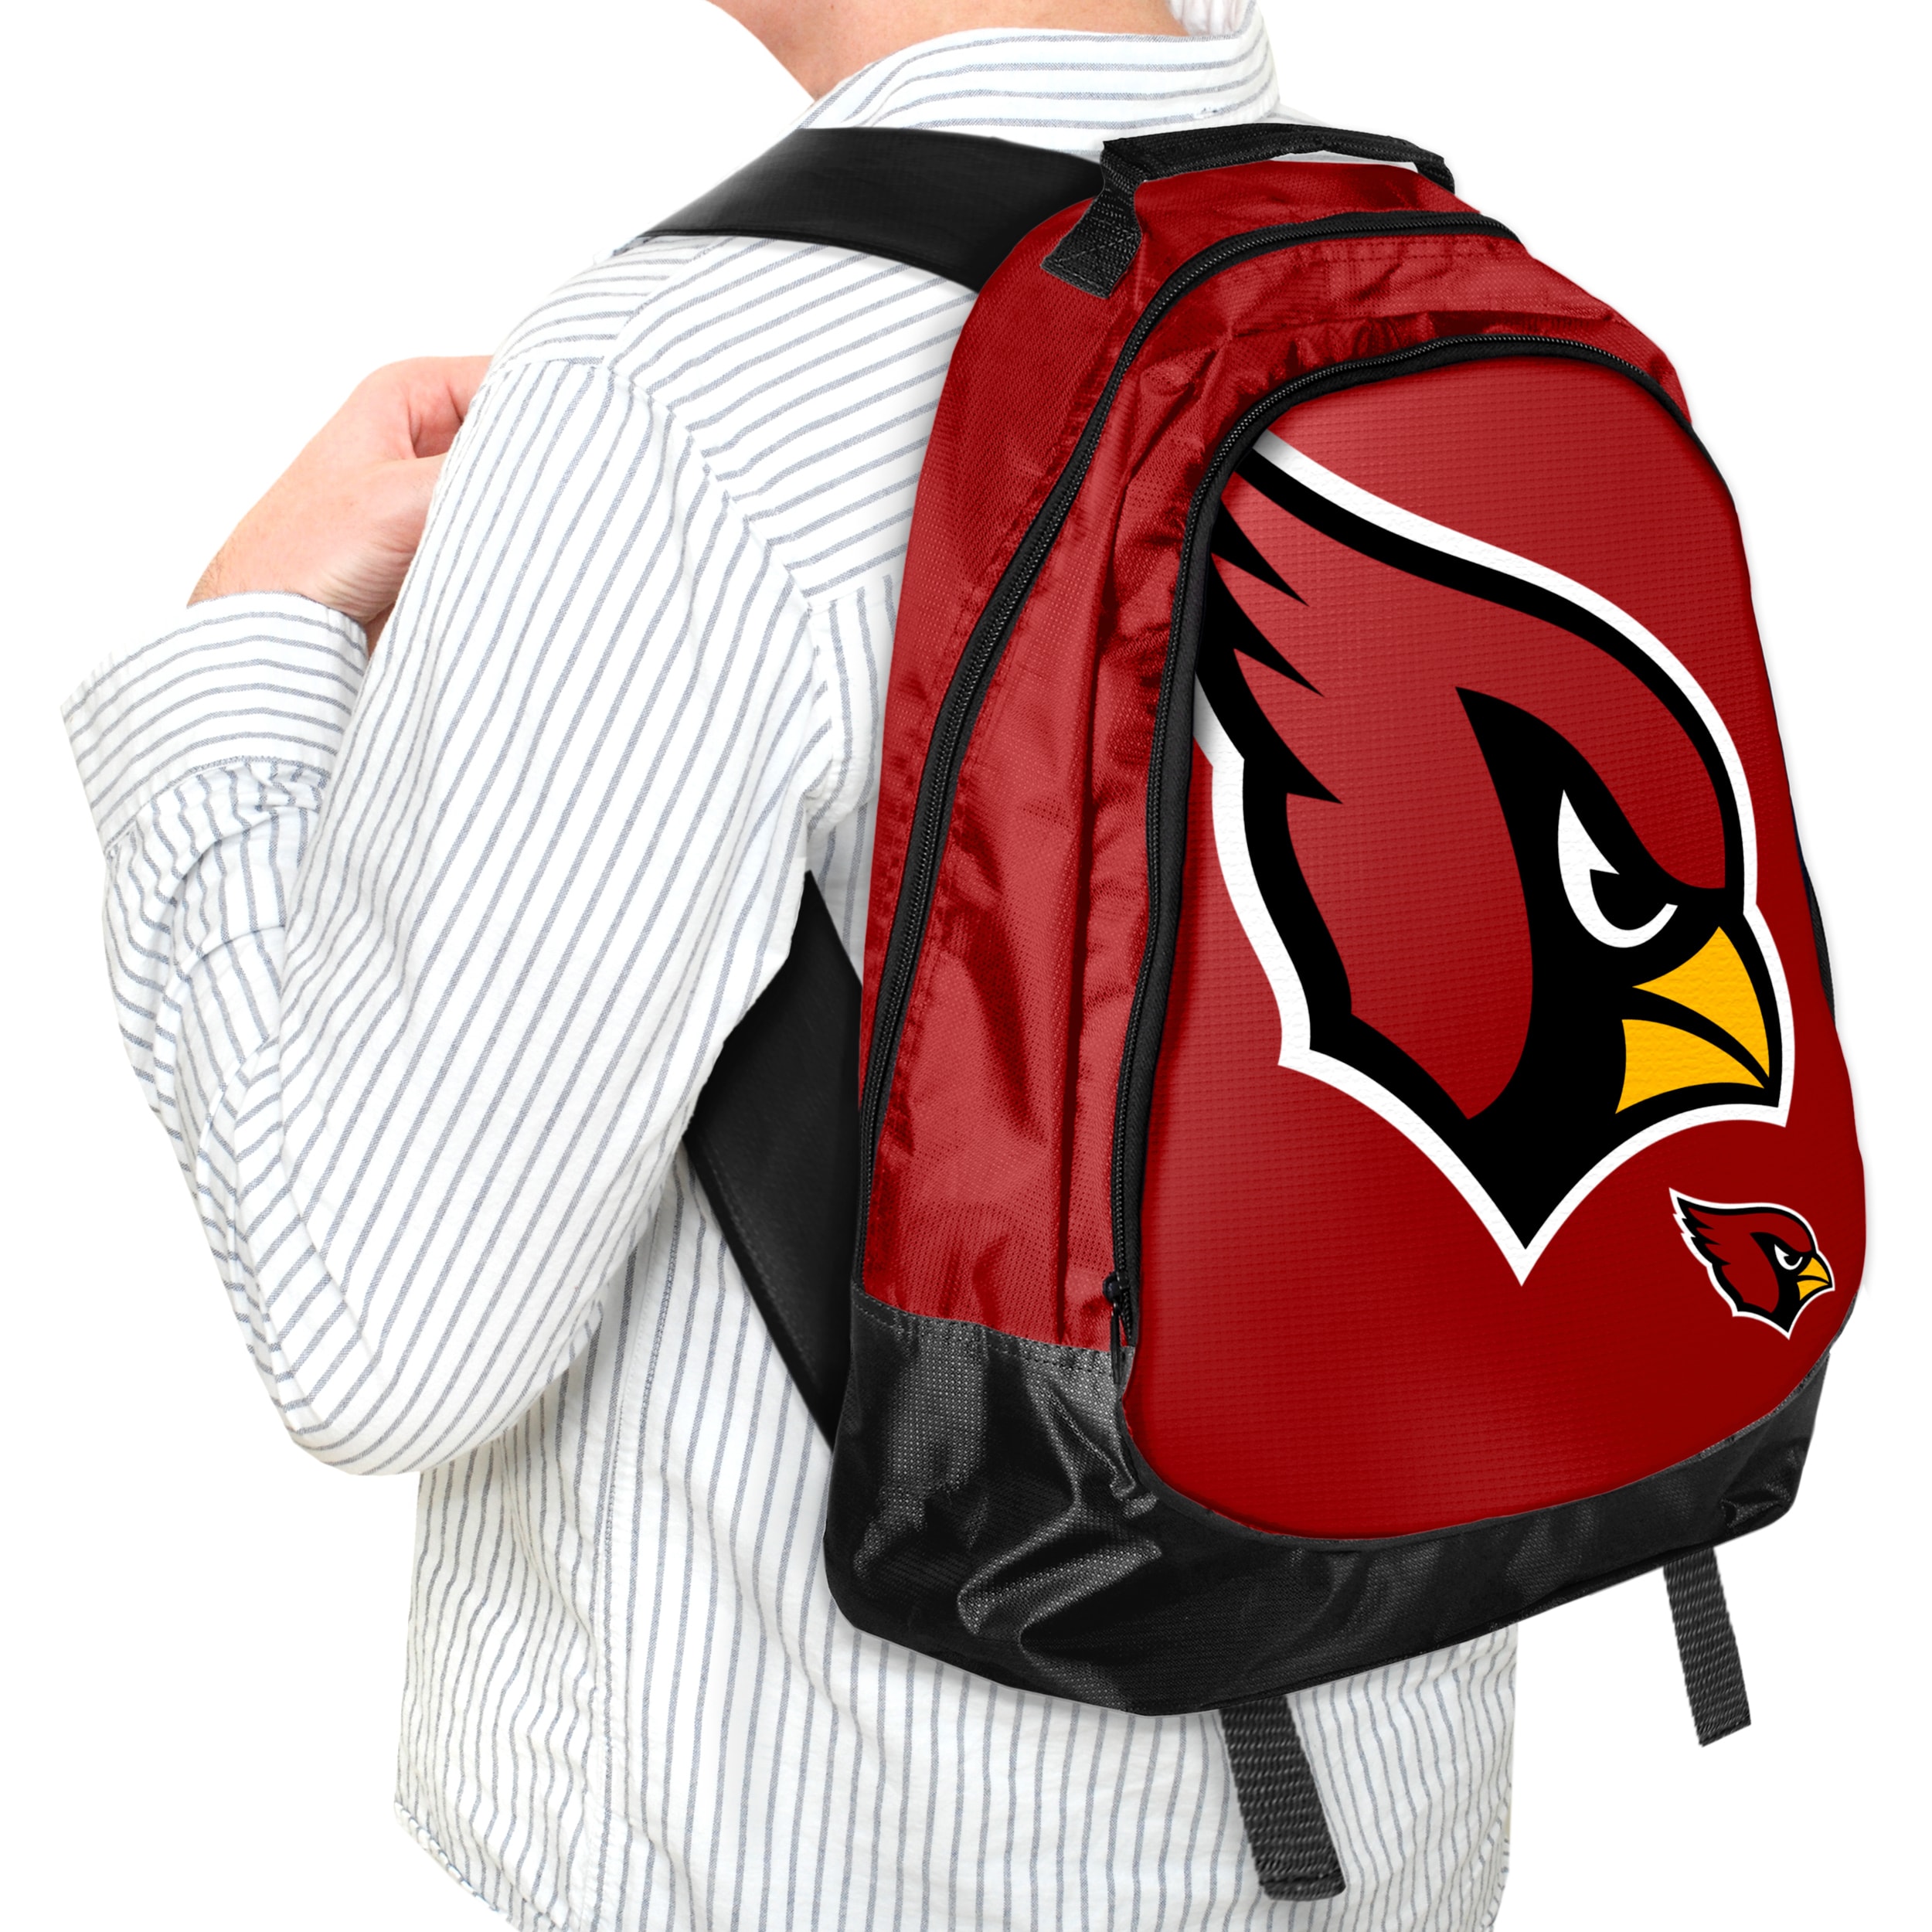 Forever Collectibles Nfl Arizona Cardinals 19 inch Structured Backpack